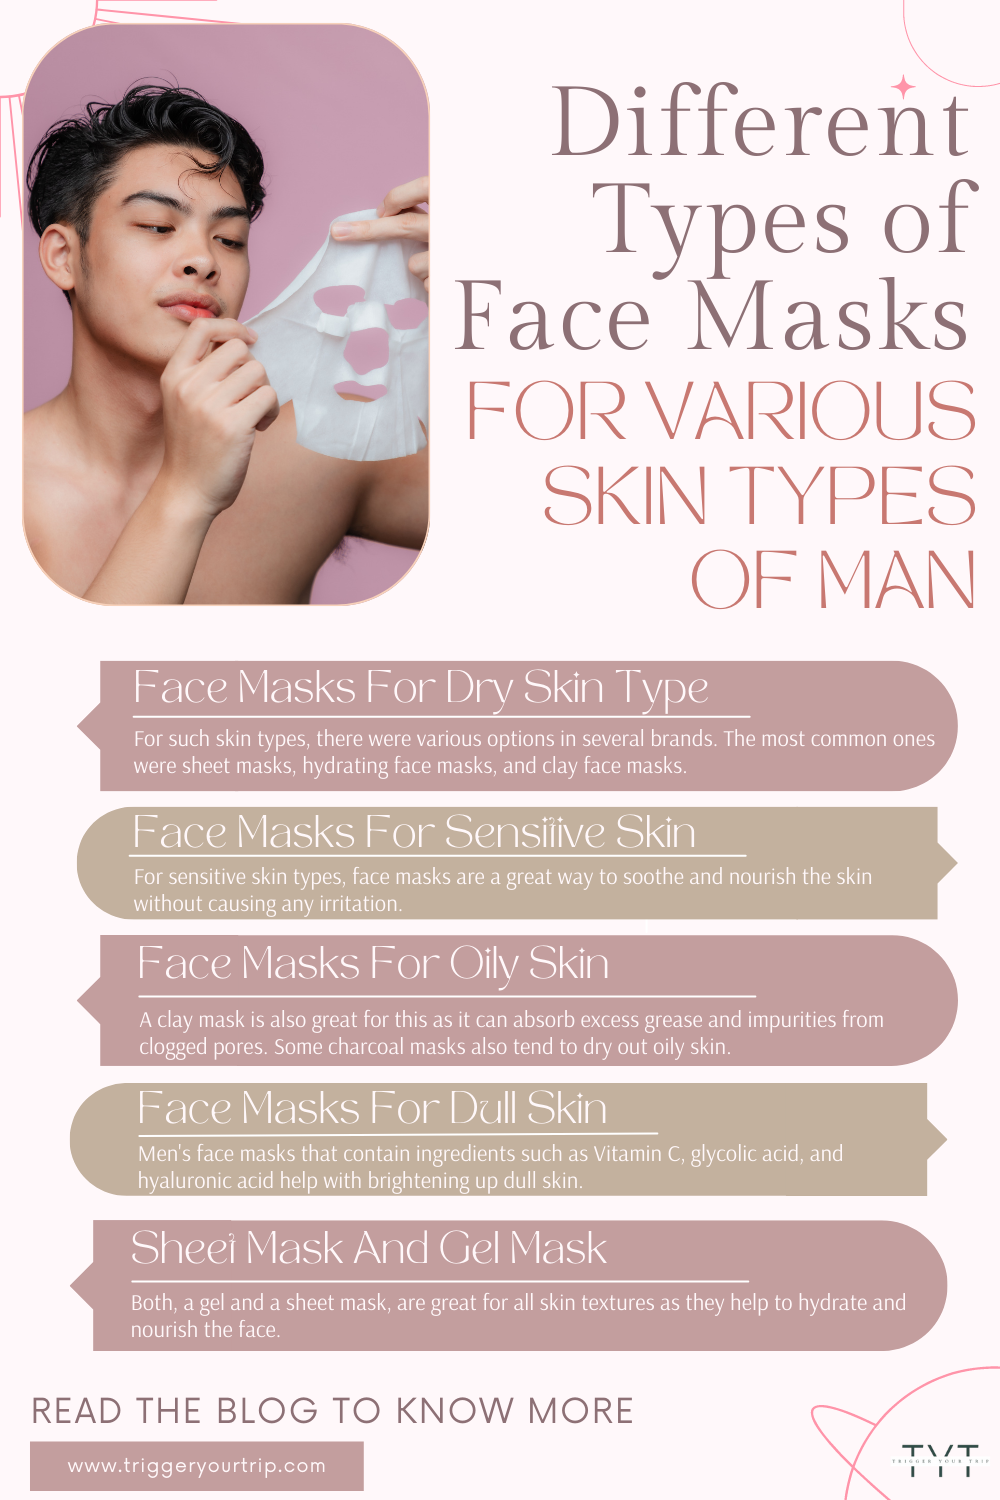 sheet mask and gel mask for your skincare routine to absorb excess oil